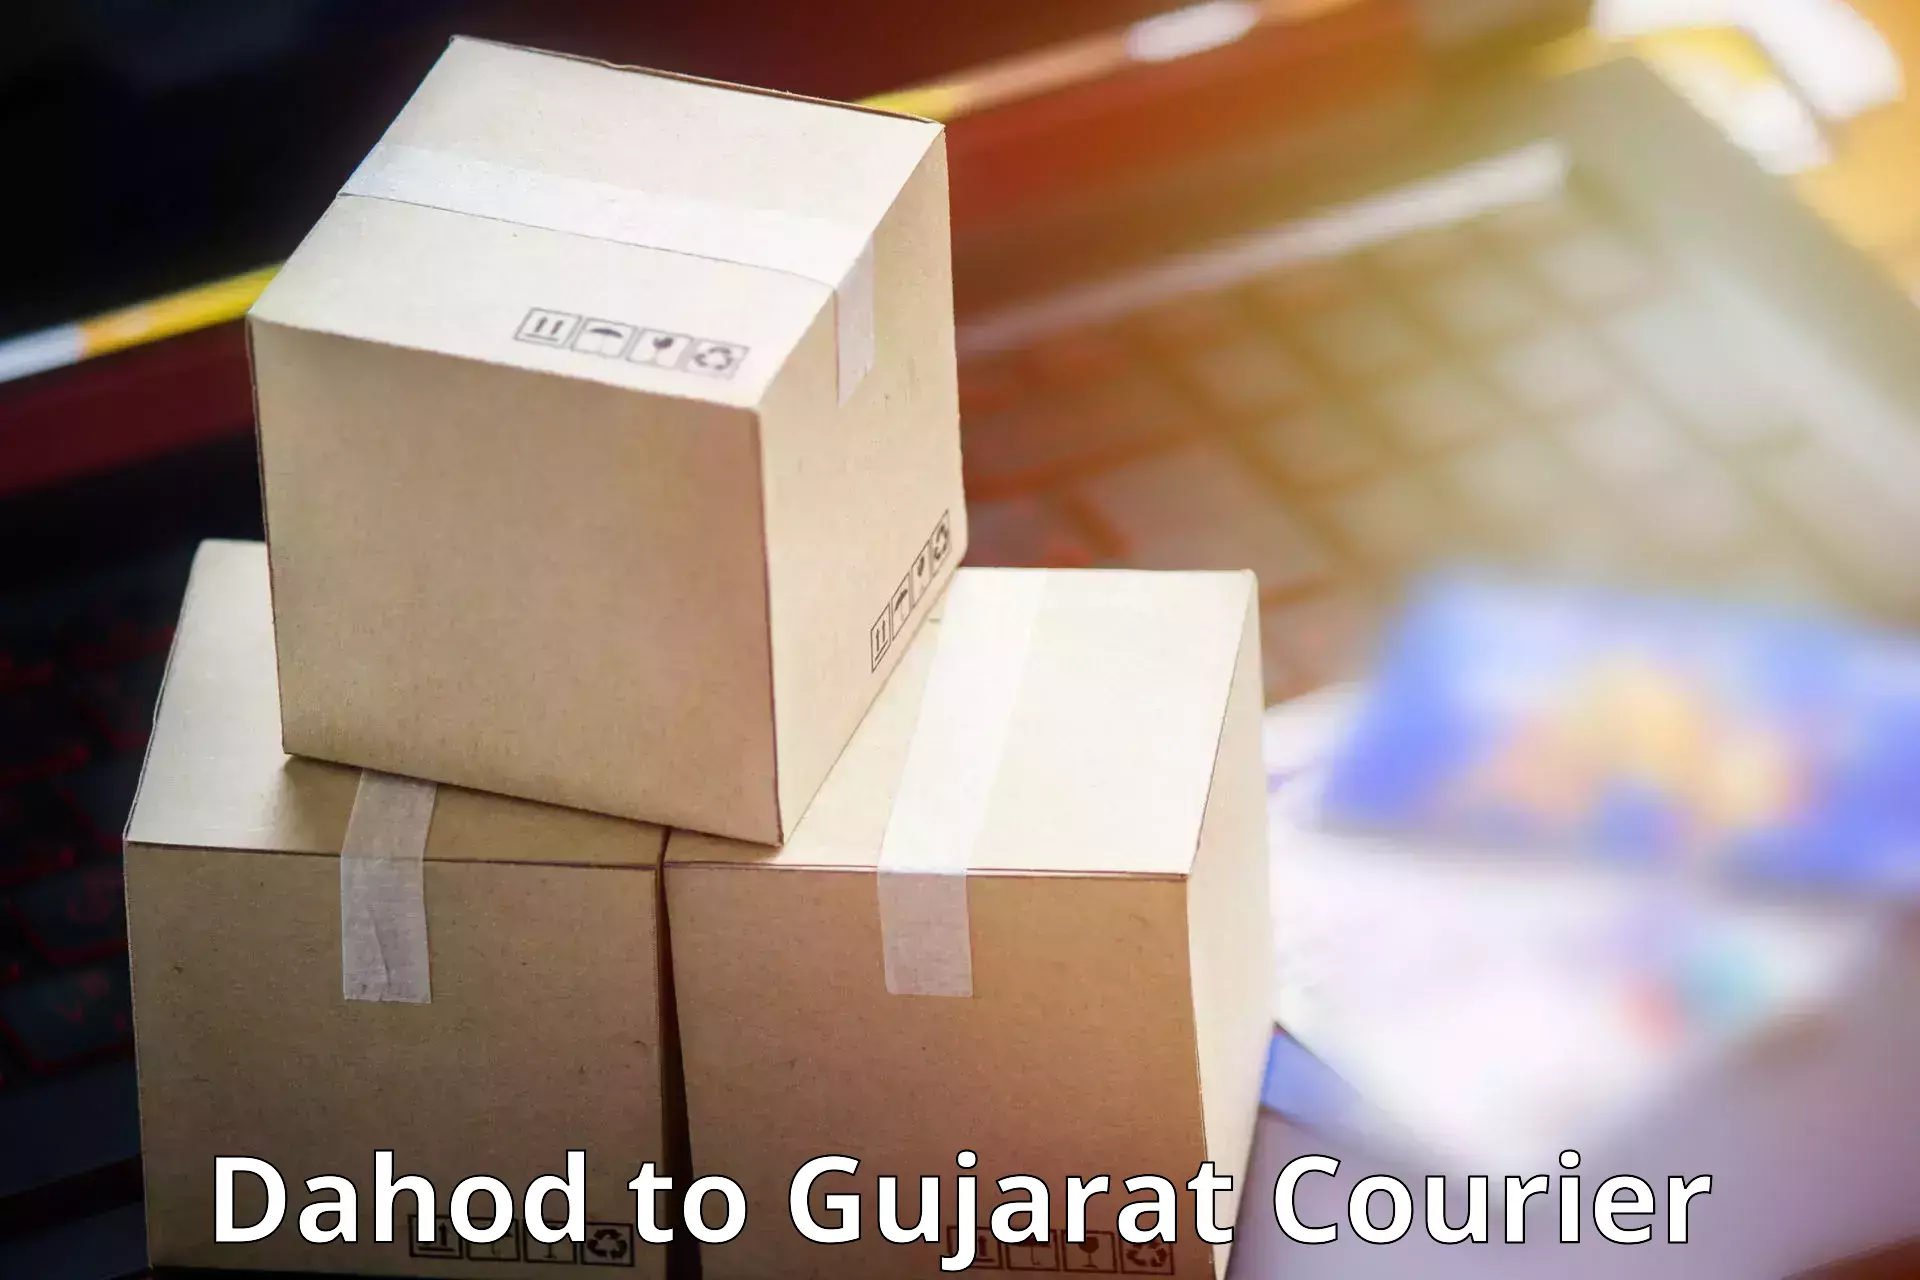 Affordable parcel service Dahod to Talala